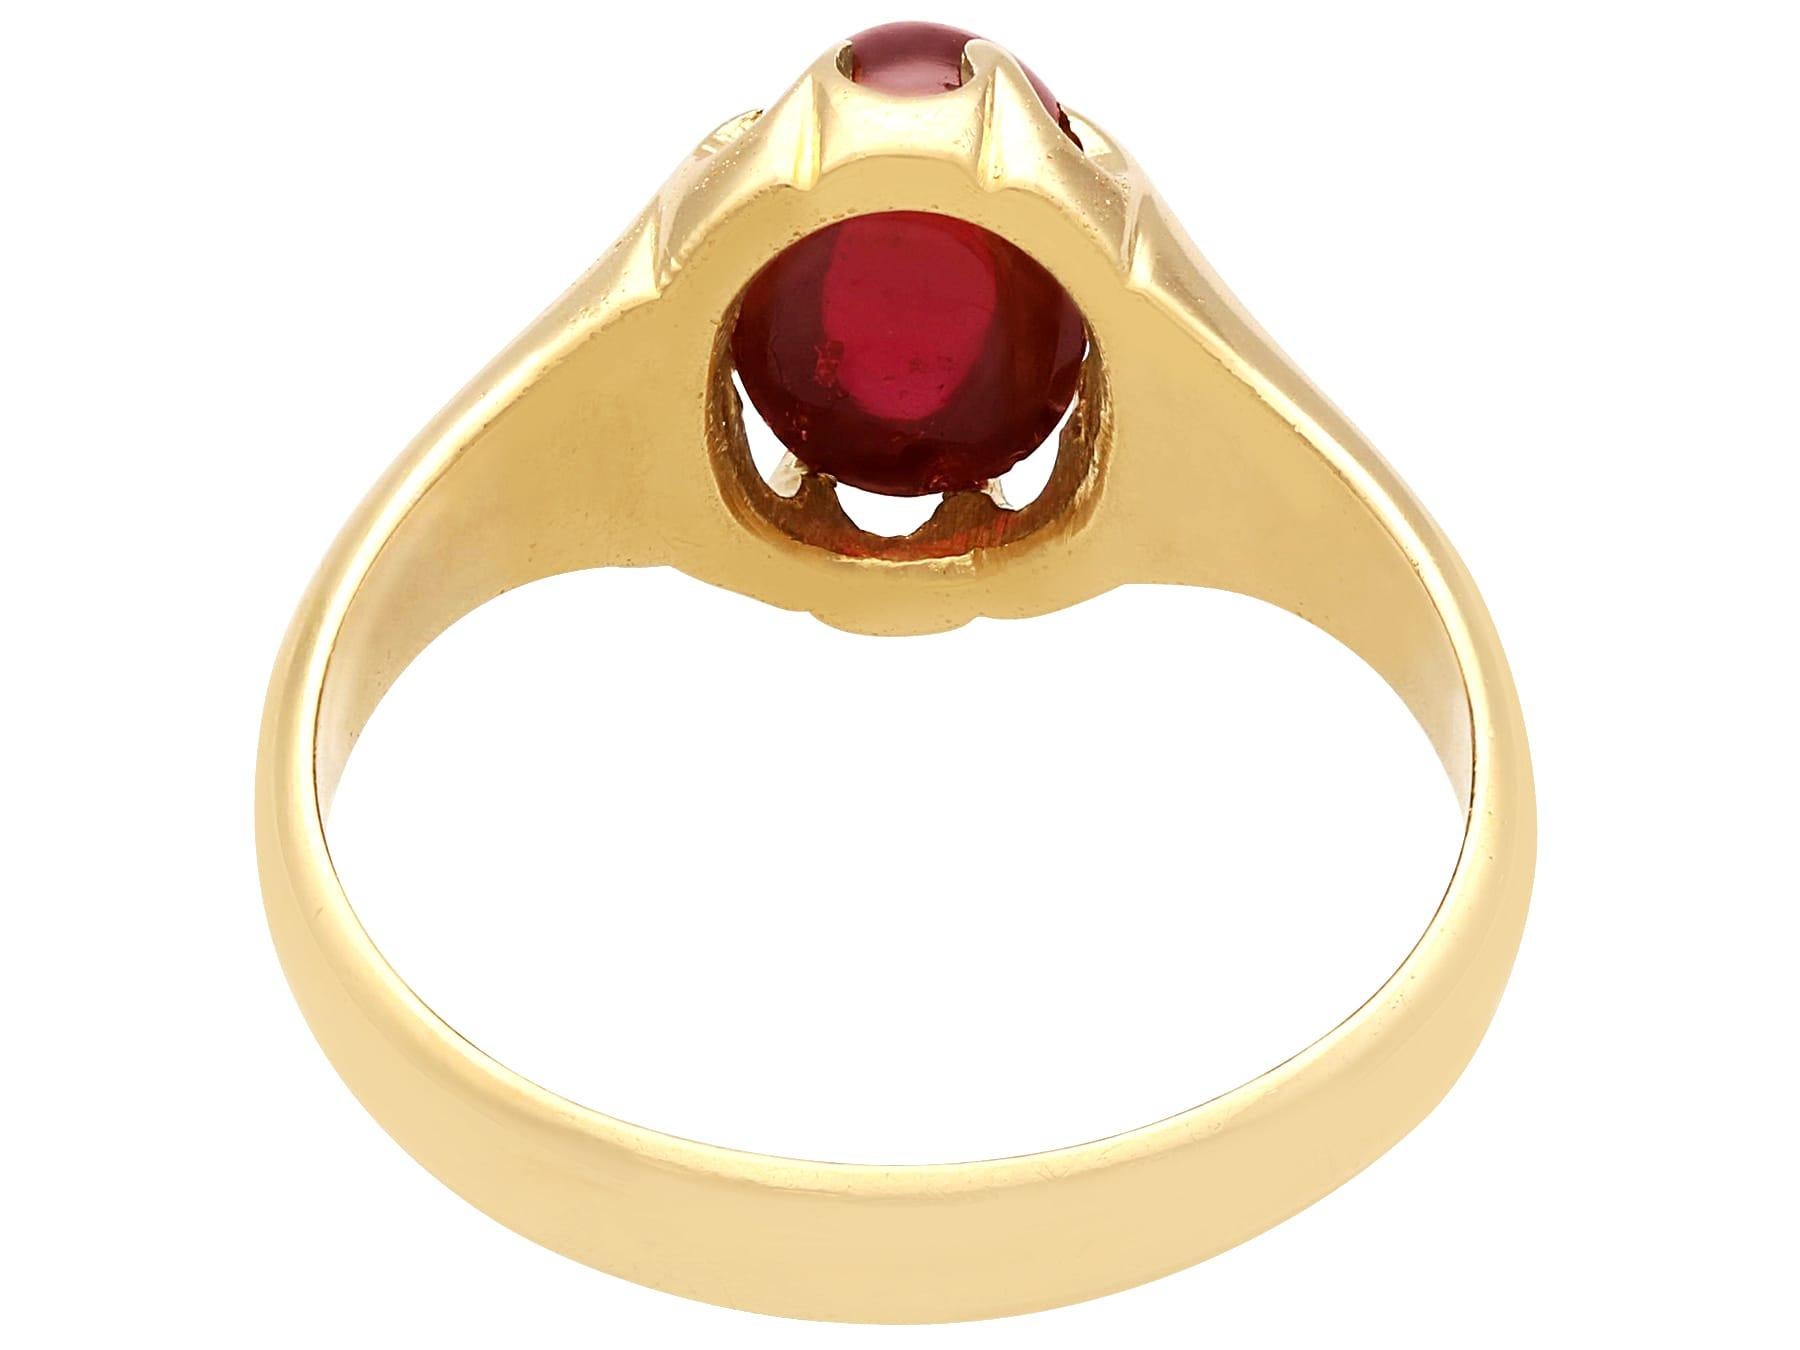 Antique 3.05 Carat Garnet and 18k Yellow Gold Dress Ring (1918) In Excellent Condition For Sale In Jesmond, Newcastle Upon Tyne